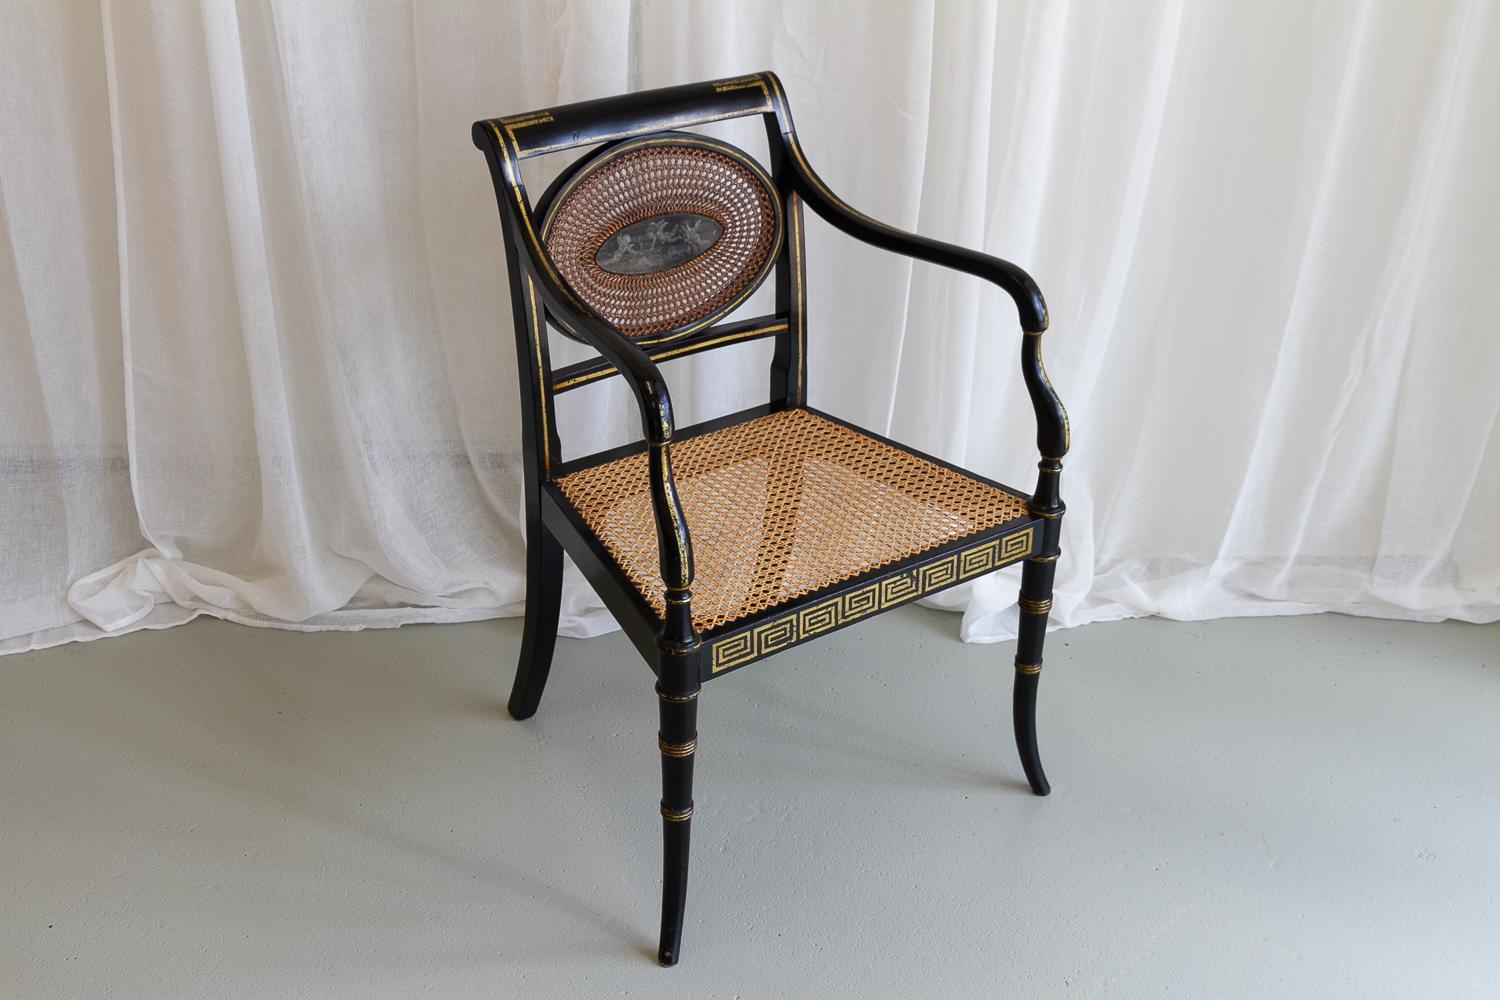 English Regency Black and Gold Armchair, 19th Century.

Antique shield back chair with hand painted cherub/putti motif. Ebonized frame with golden Greek key patterns and striping.  Woven cane seat and back. Turned curved front legs. 

Good original